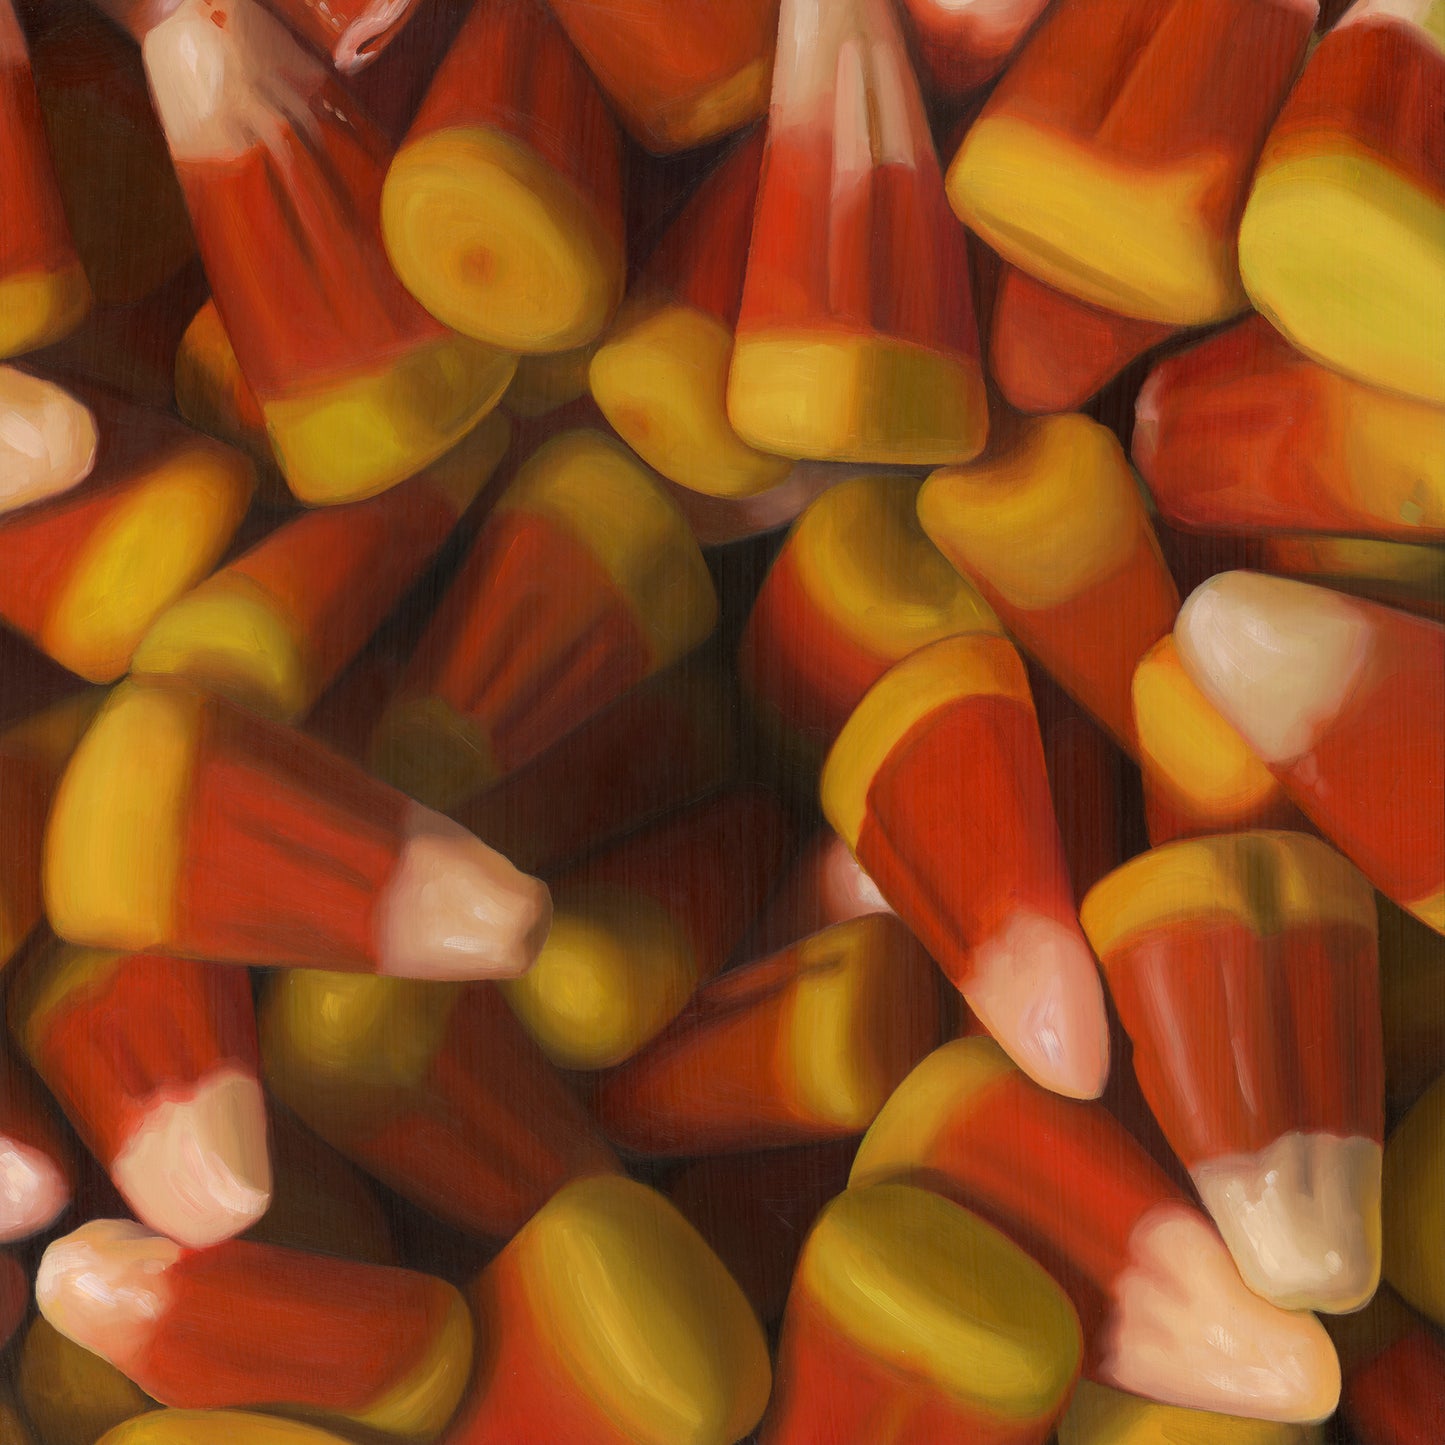 The original painting “Candy Corn" by Hannah Kilby from Hannah Michelle Studios.